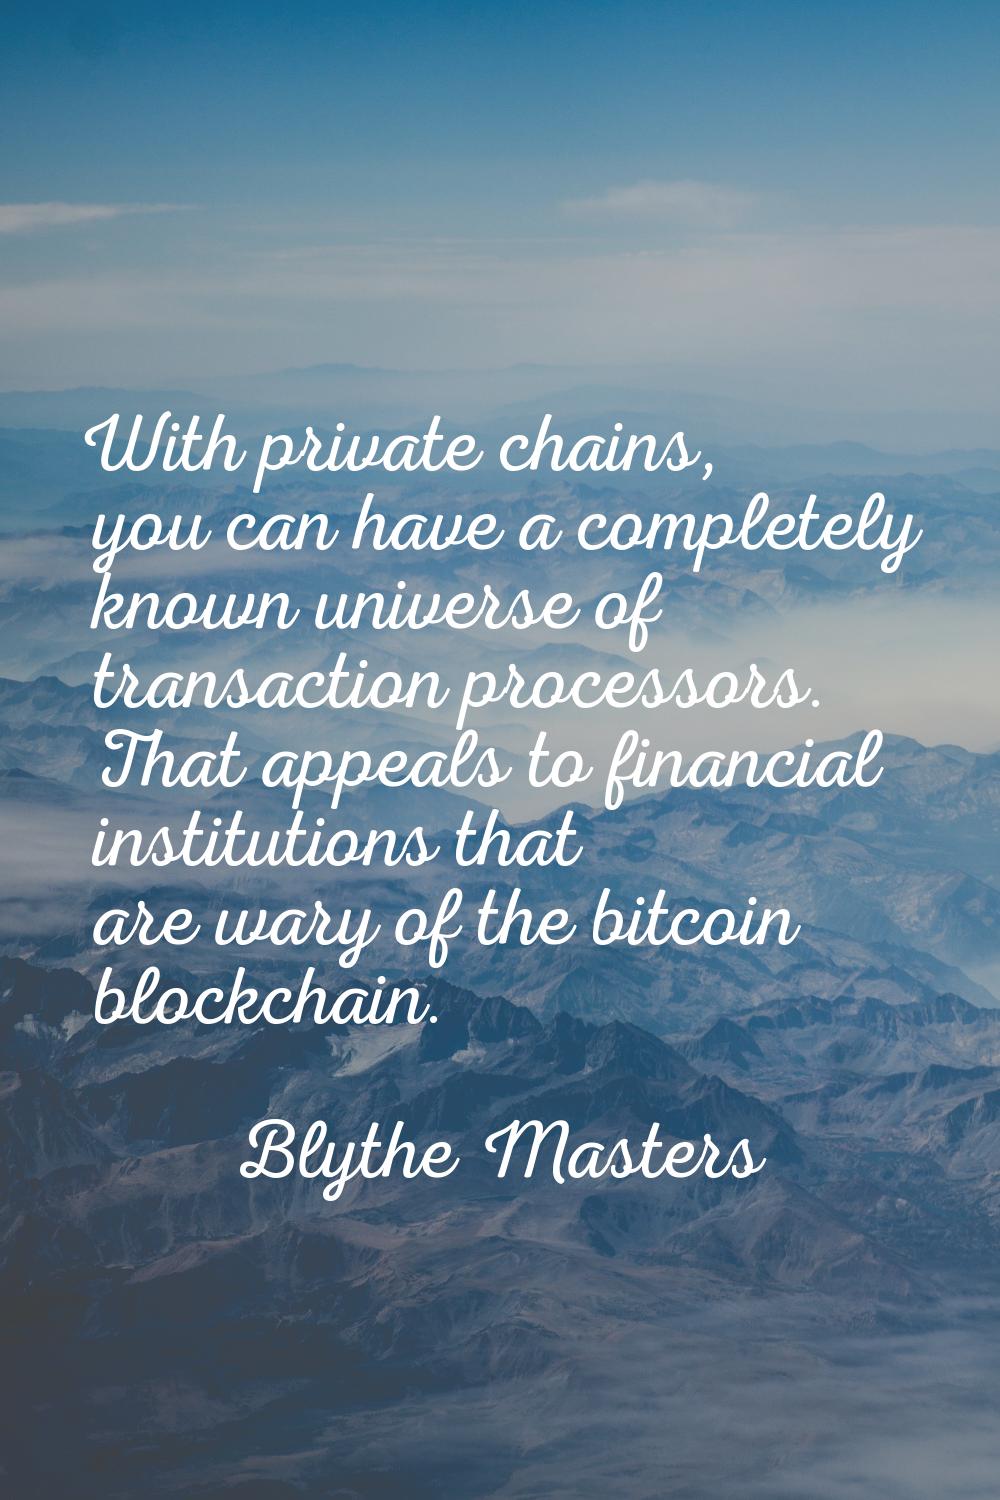 With private chains, you can have a completely known universe of transaction processors. That appea